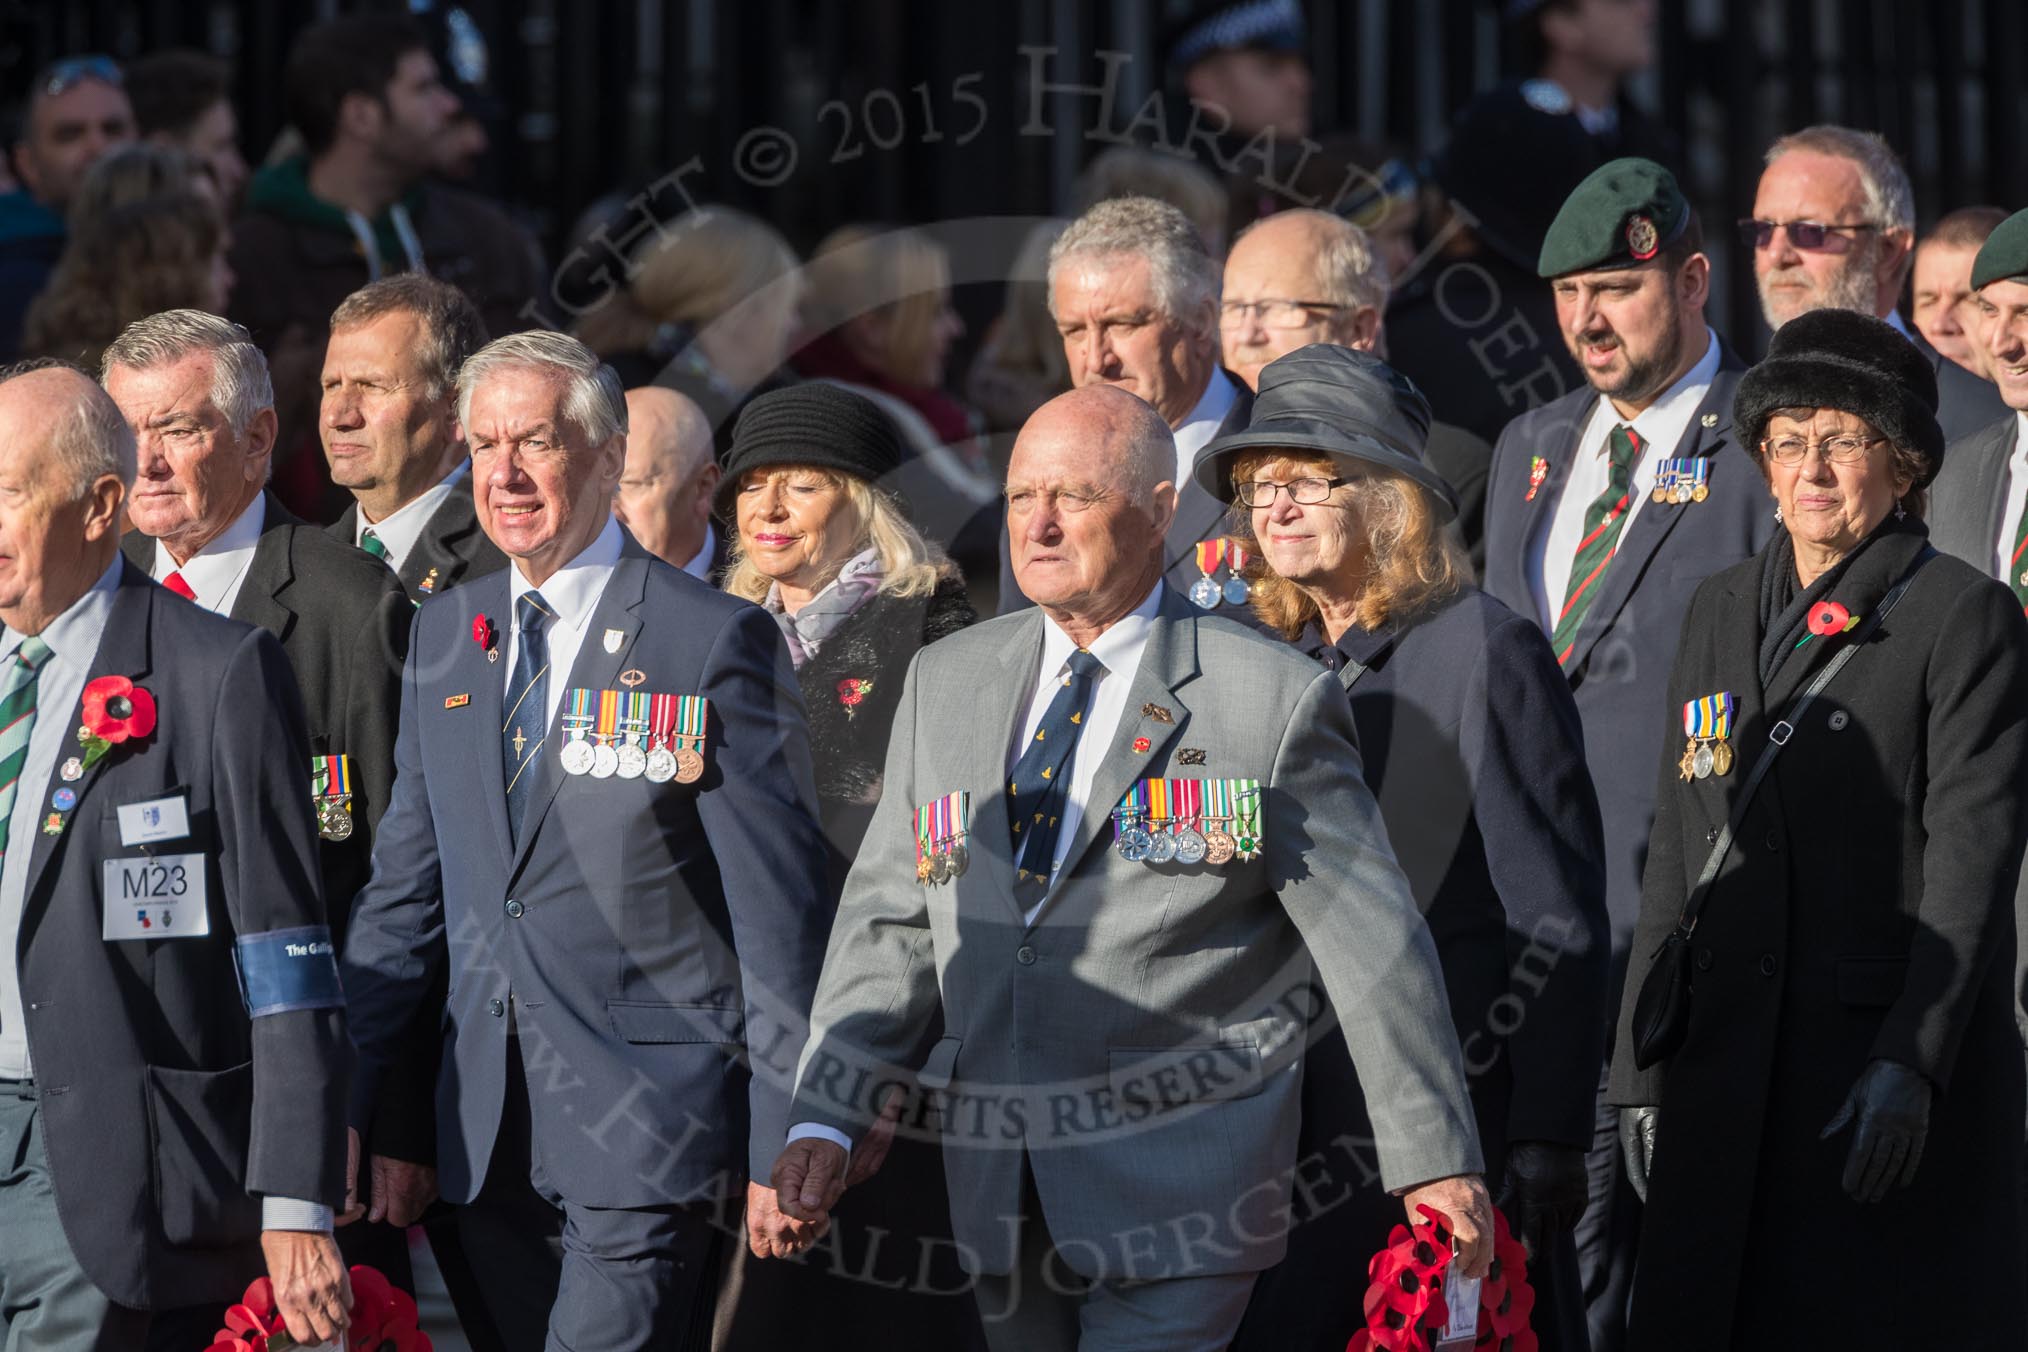 March Past, Remembrance Sunday at the Cenotaph 2016: M23 Gallipoli Association.
Cenotaph, Whitehall, London SW1,
London,
Greater London,
United Kingdom,
on 13 November 2016 at 13:16, image #2697